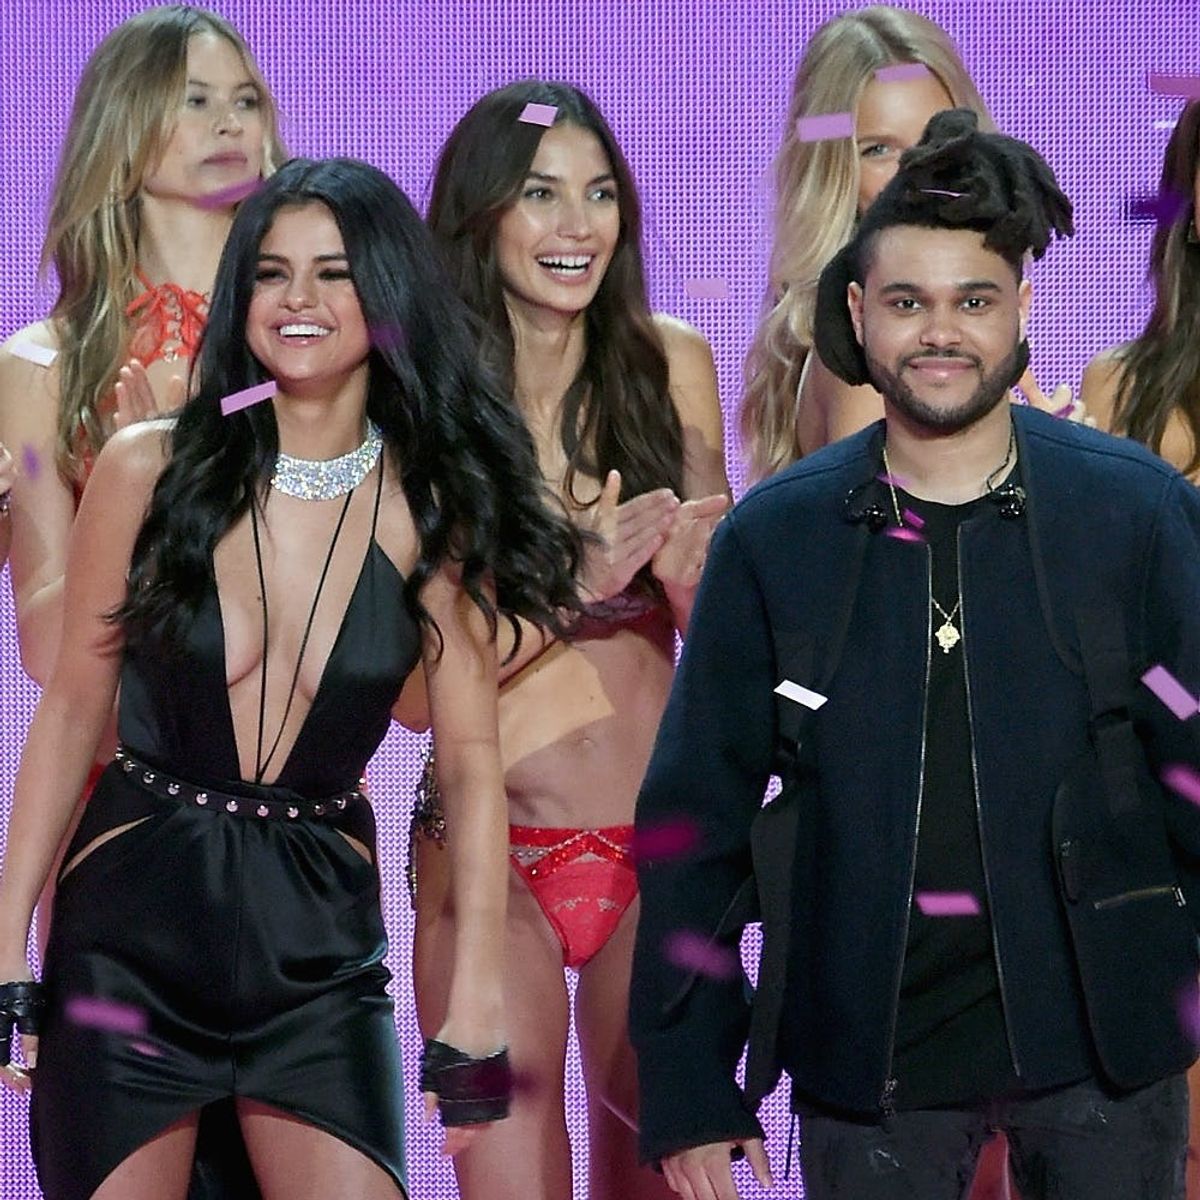 Selena Gomez Just Made Her Official Debut on The Weeknd’s Instagram Feed